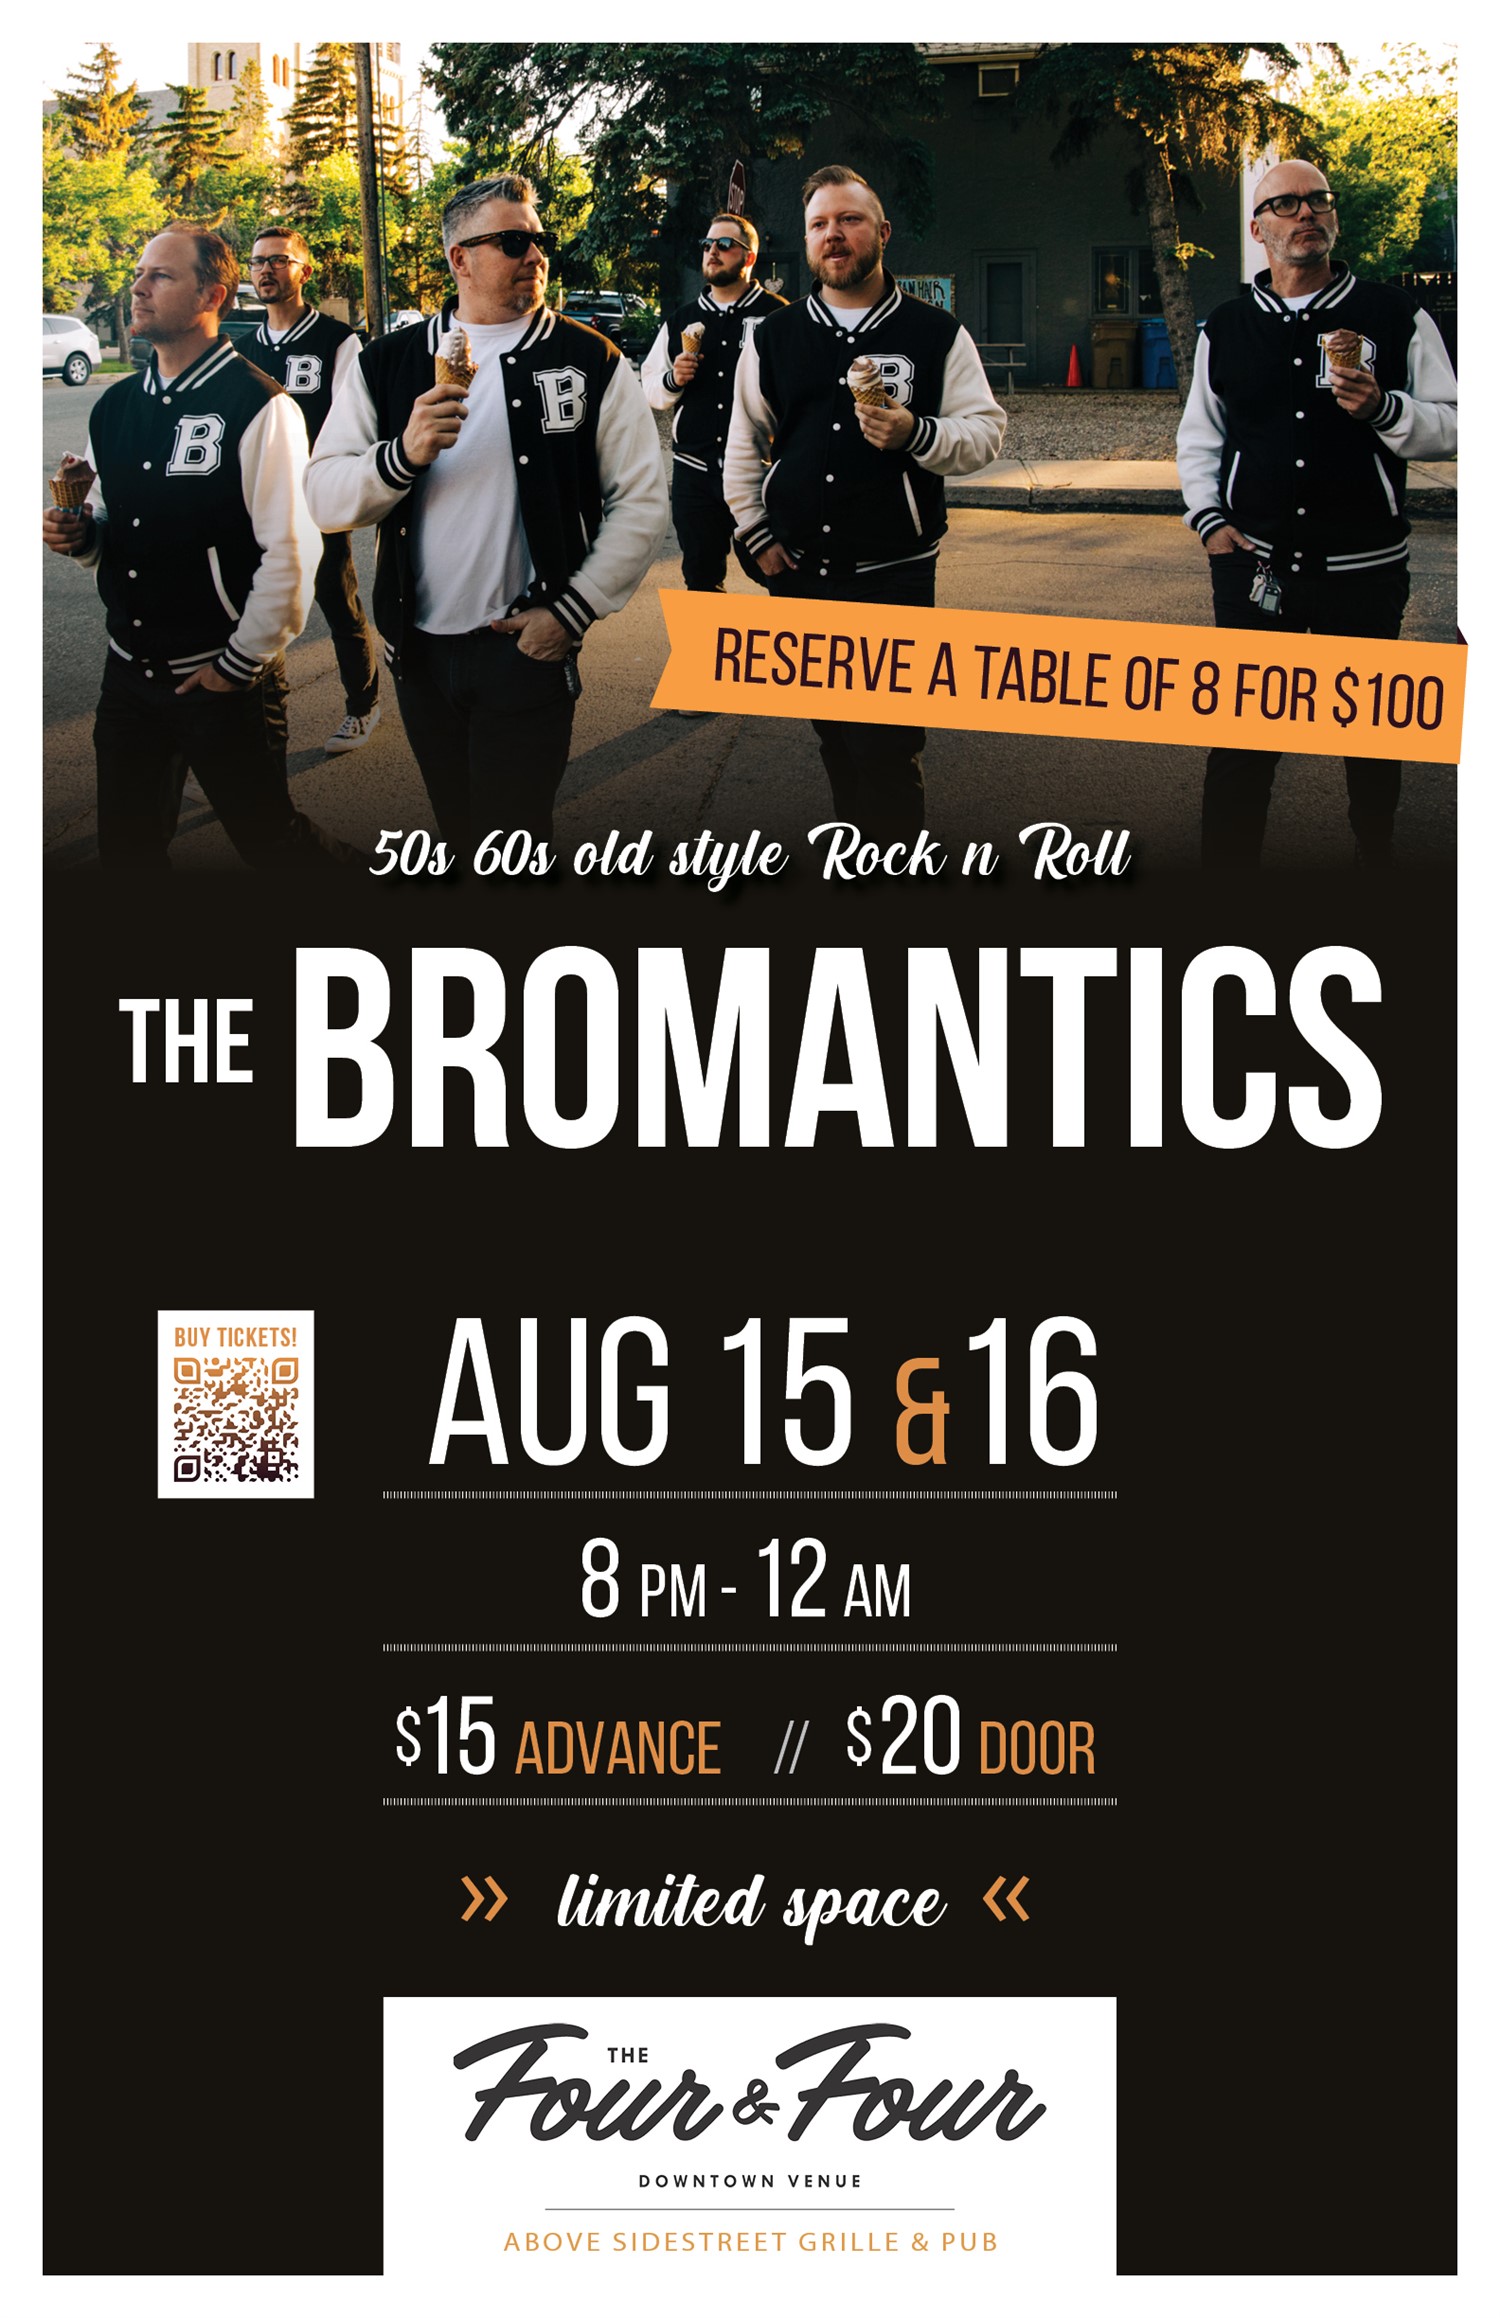 The Bromantics Aug. 15, 2024 on Aug 15, 20:00@The Four and Four, above Sidestreet Grille & Bar - Buy tickets and Get information on Sidestreet Live / Four and Four 